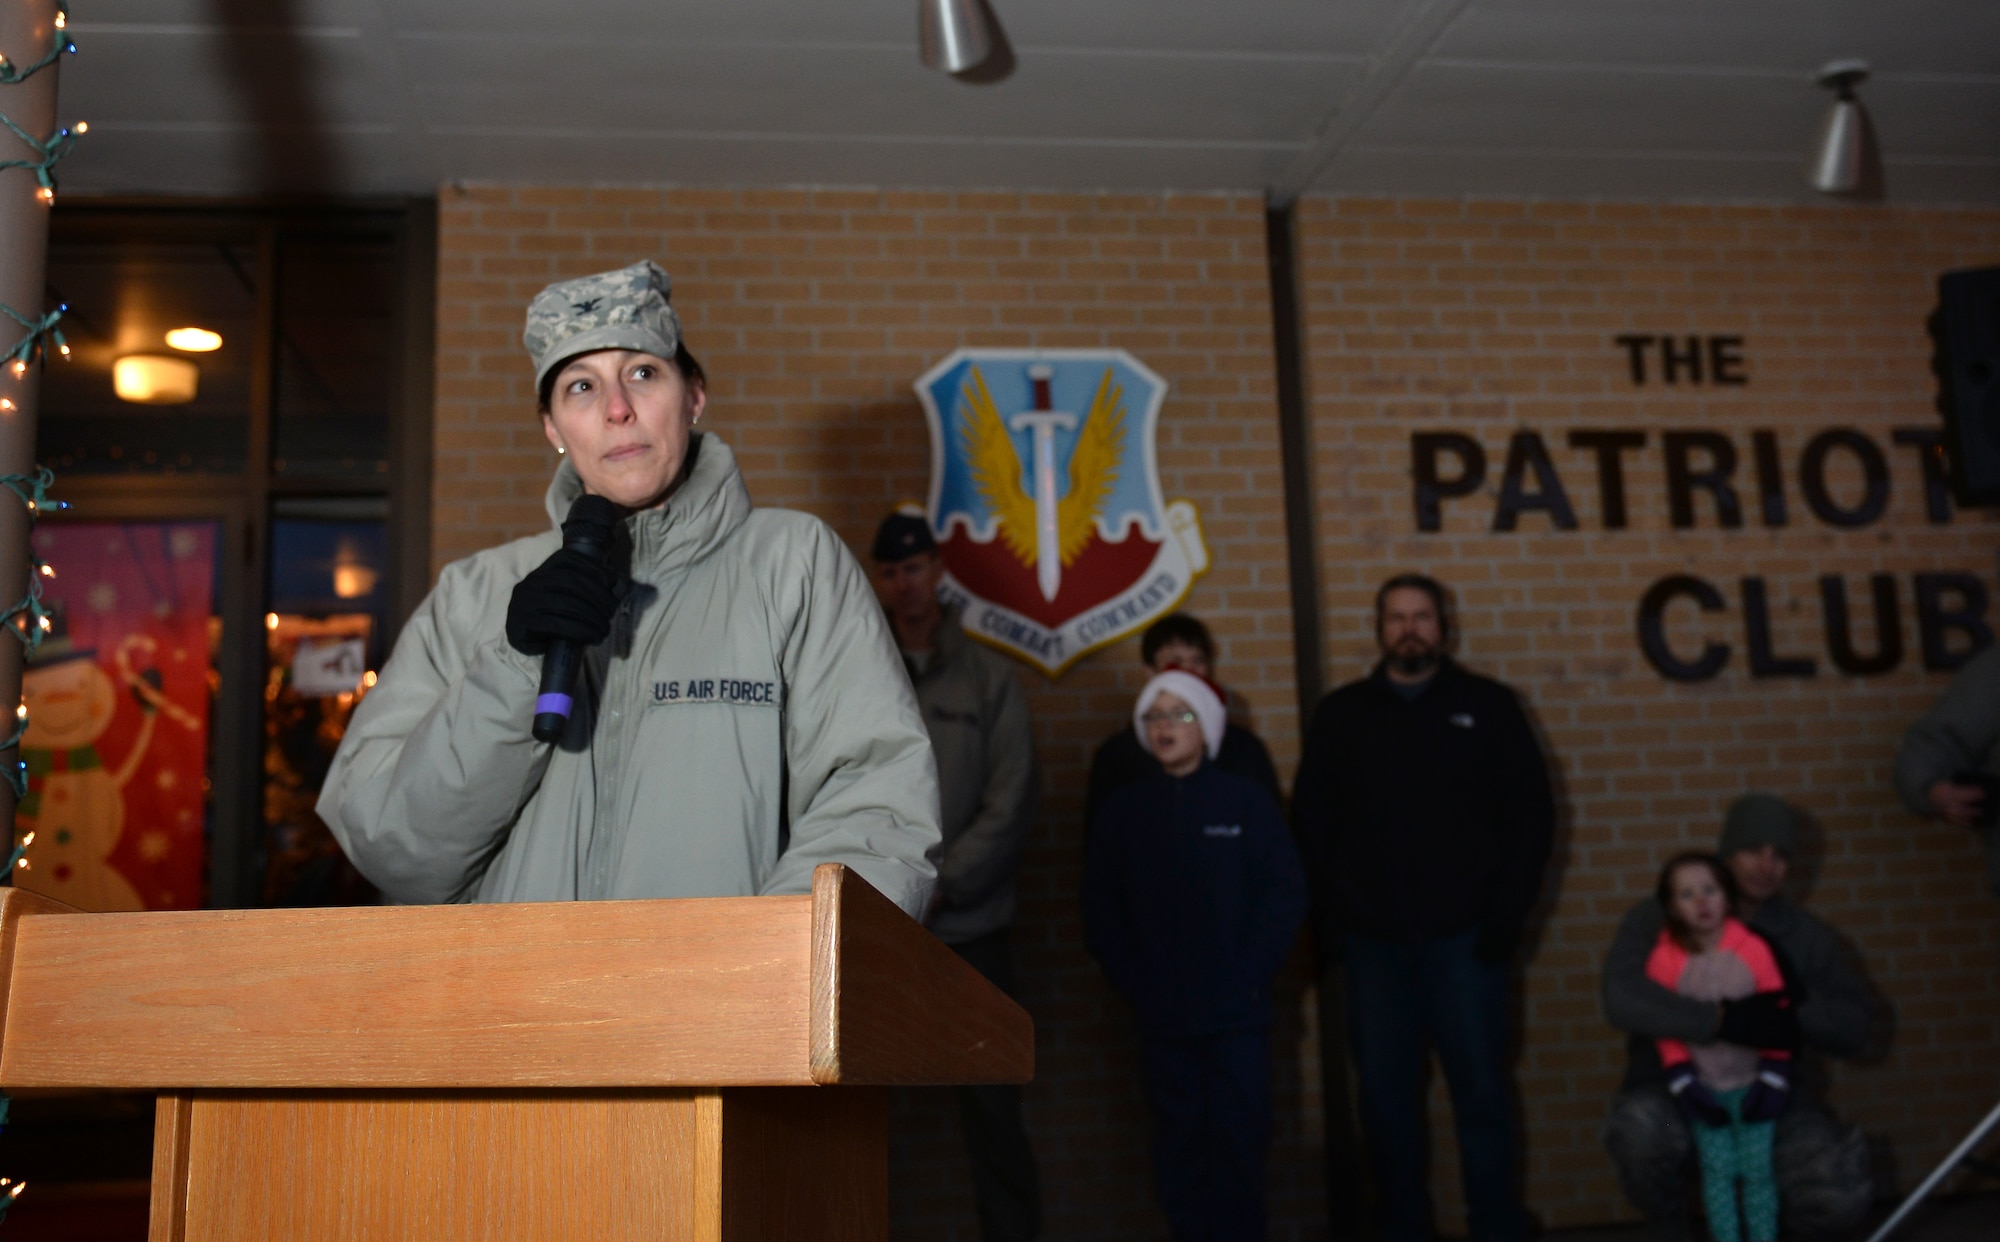 Colonel Sherri Levan, 55th Wing vice commander, greets the crowd during the annual Offutt Christmas Tree Lighting event held at the Patriot Club, Offutt Air Force Base, Nebraska, Dec. 6, 2018. The annual tree-lighting event was attended by an estimated 1,500 people. (U.S. Air Force photo by Josh Plueger)